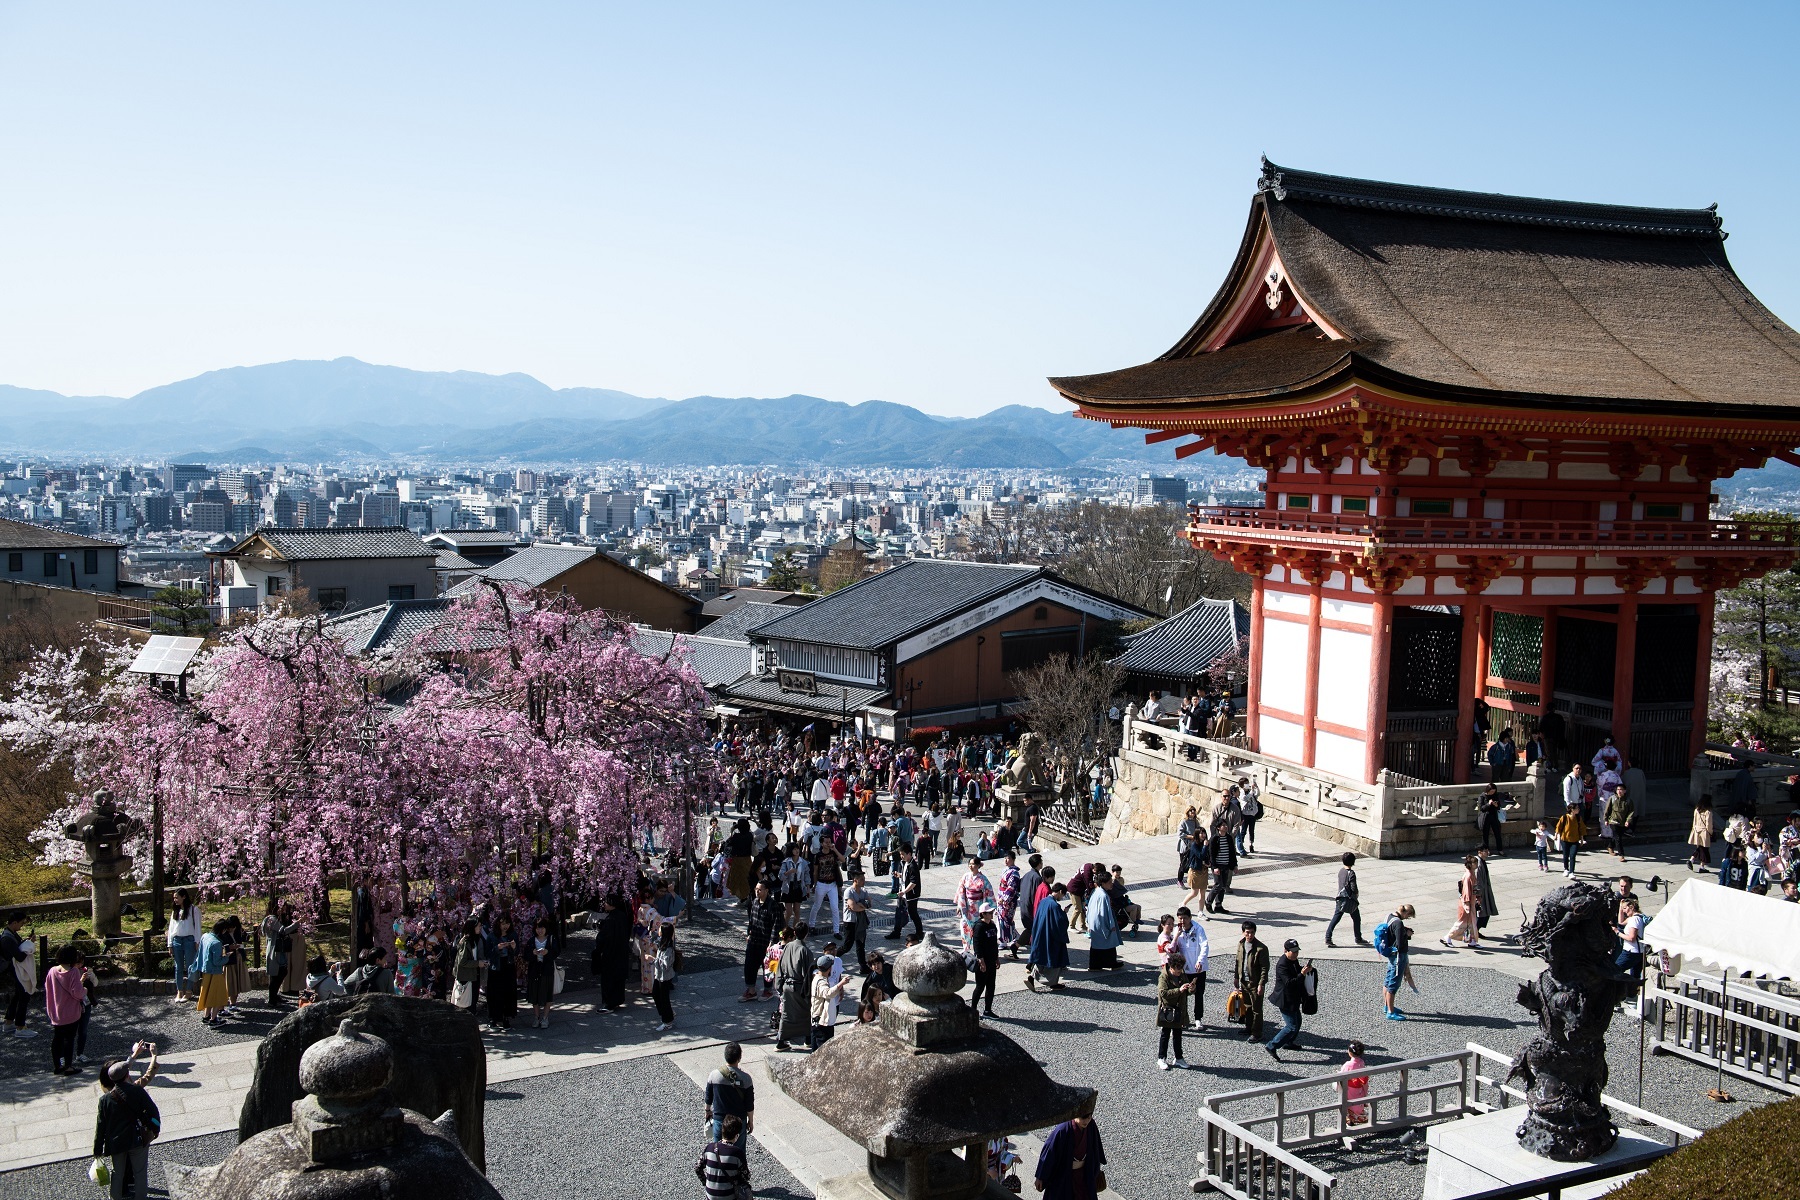 <p>One of the most celebrated temples in Japan, <a href="http://www.kiyomizudera.or.jp/en/">Kiyomizu-dera</a> (or “Pure Water Temple”) was established in 778 CE. The UNESCO World Heritage Site’s highlight is the main hall, where pilgrims gather to worship at a statue of the temple’s deity, Kannon (or “goddess”) with 11 faces and 42 arms. </p><p>The temple’s wooden stage—perched 13 metres (43 feet) above the hillside—overlooks a beautiful view of cherry and maple trees. </p>